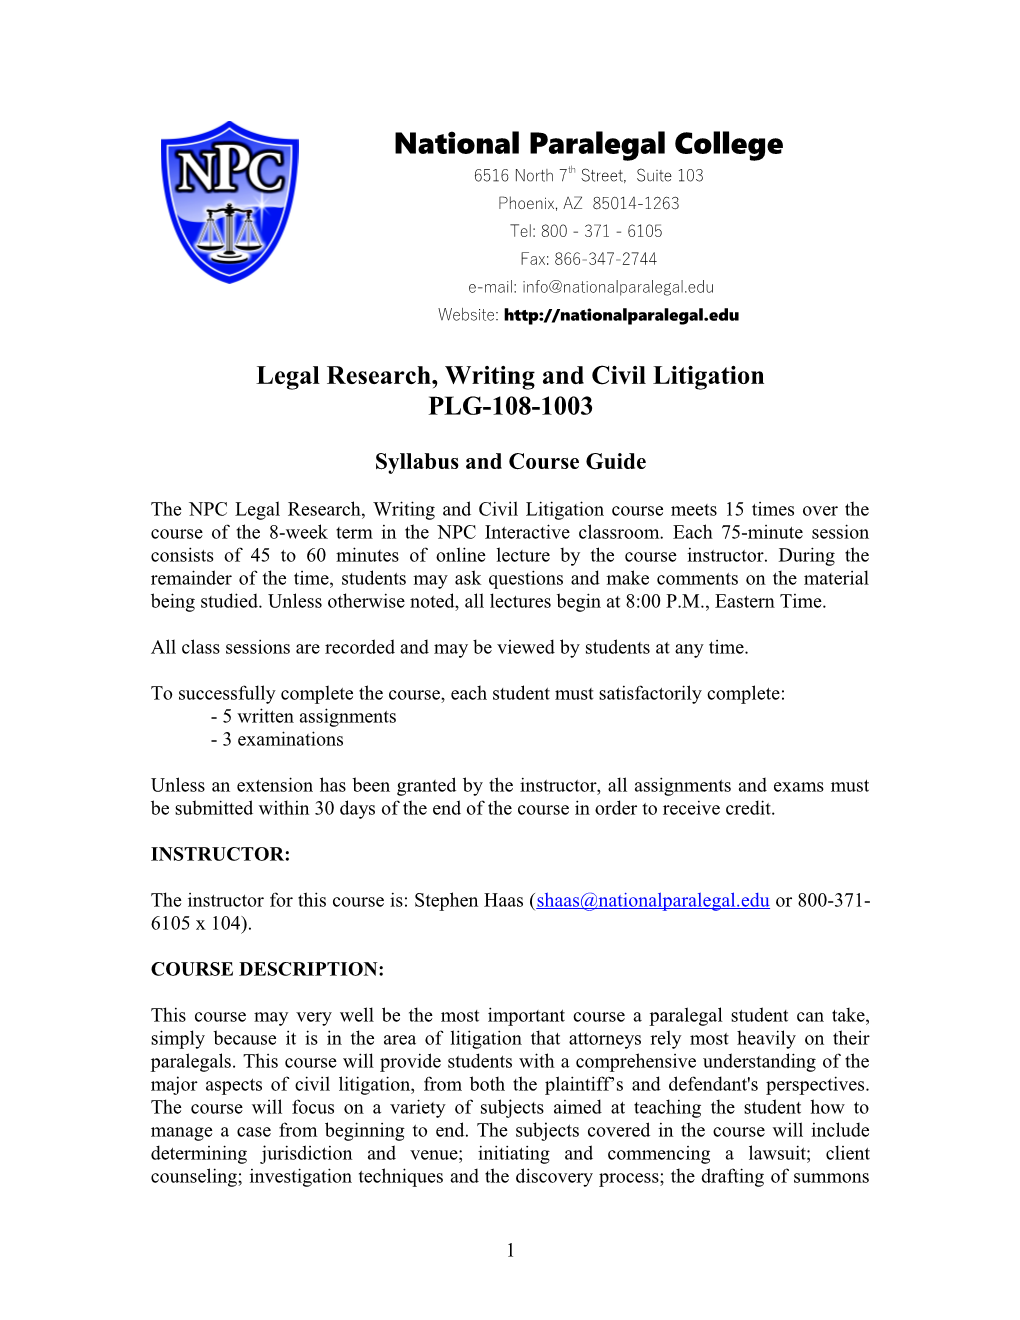 Legal Research, Writing and Civil Litigation